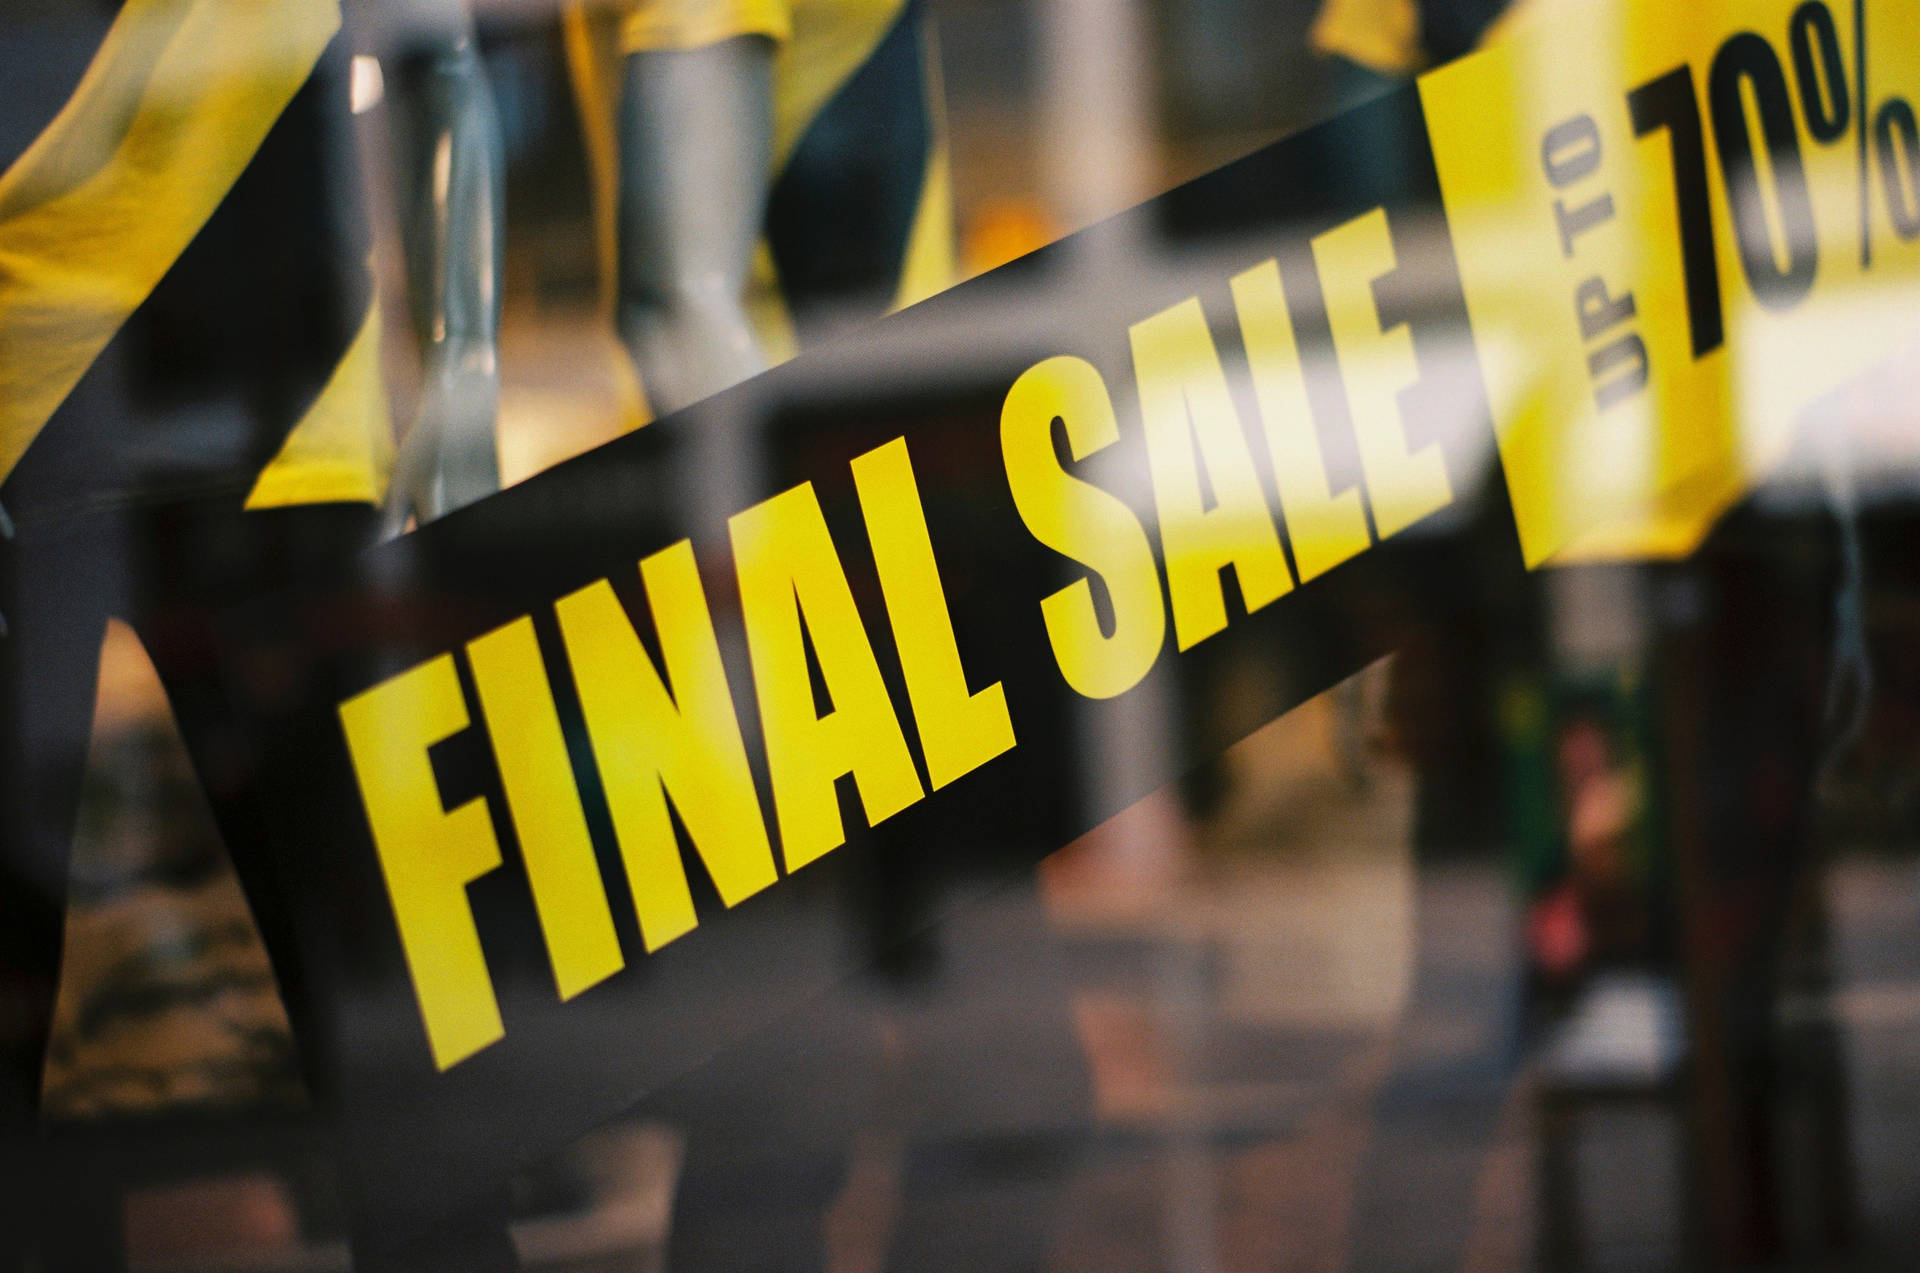 Final Sale Signage At A Retail Store